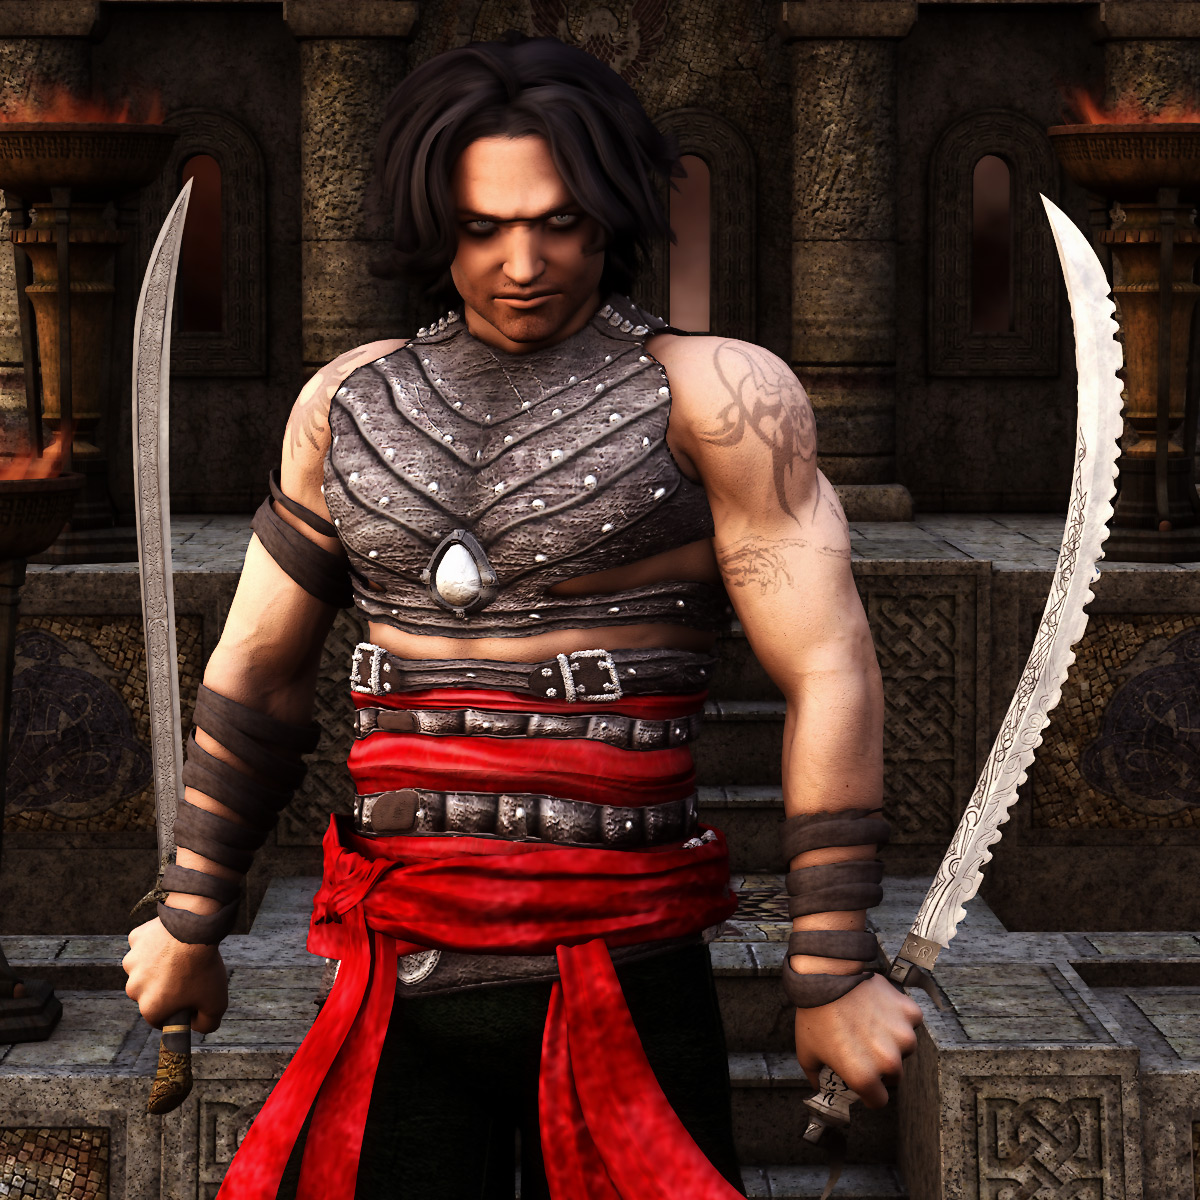 Prince of Persia: Warrior Within by DarkWarr1or on DeviantArt